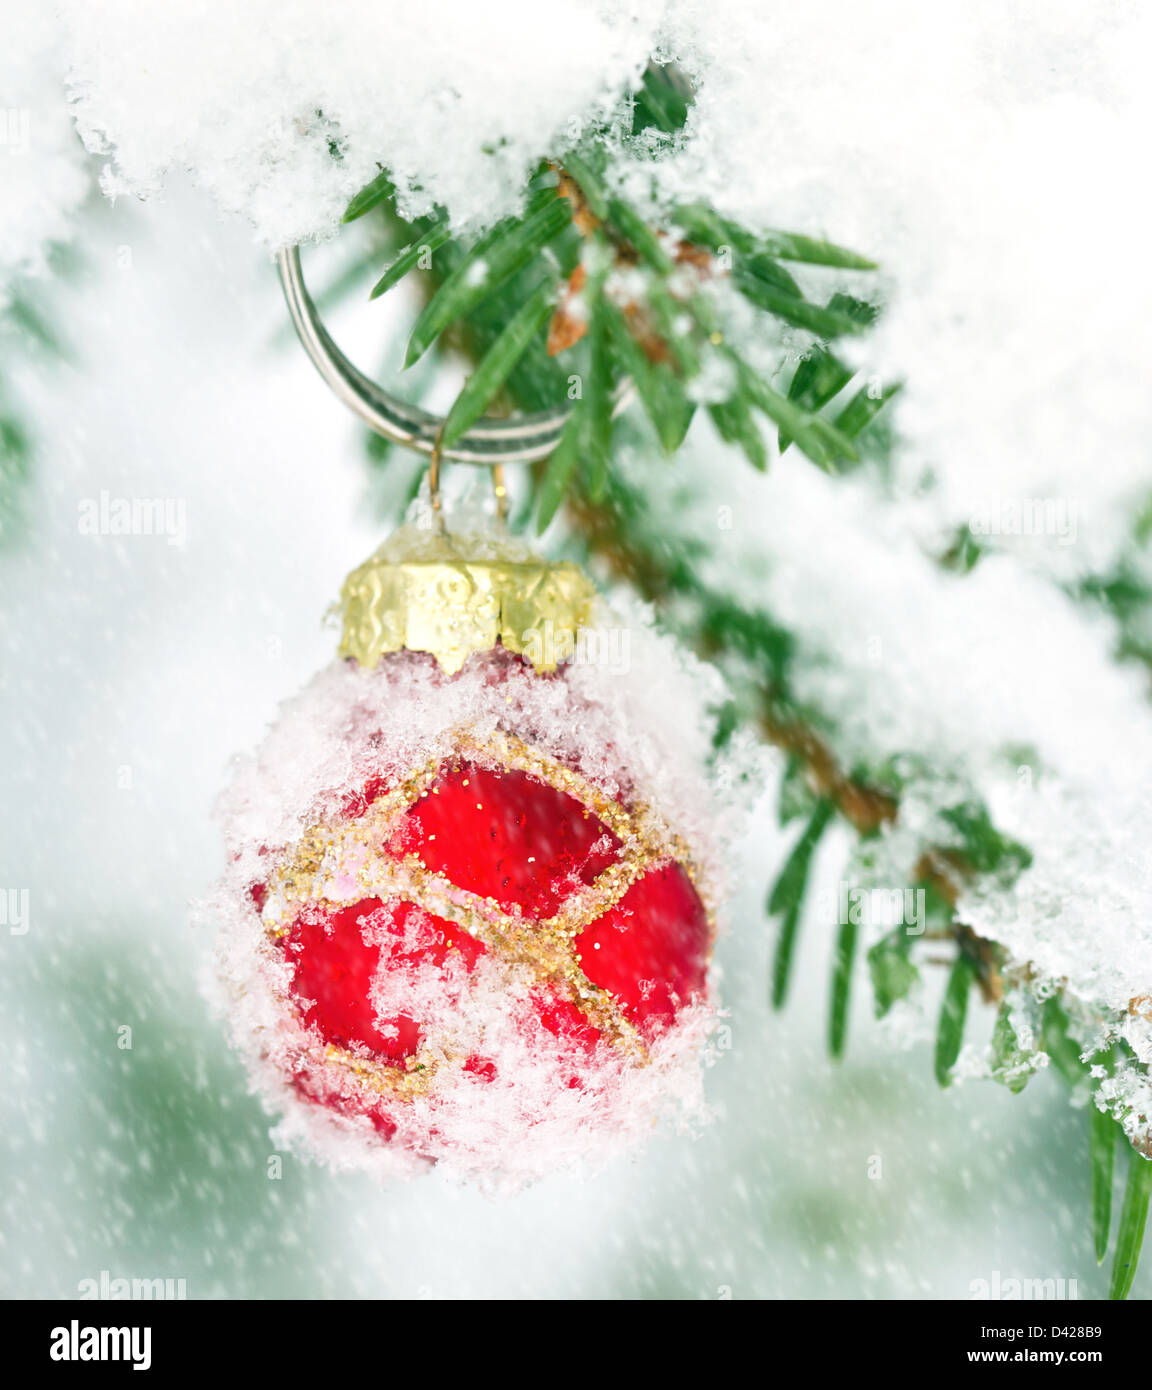 Red Christmas bauble hanging outdoors in a snowy Xmas tree Stock Photo